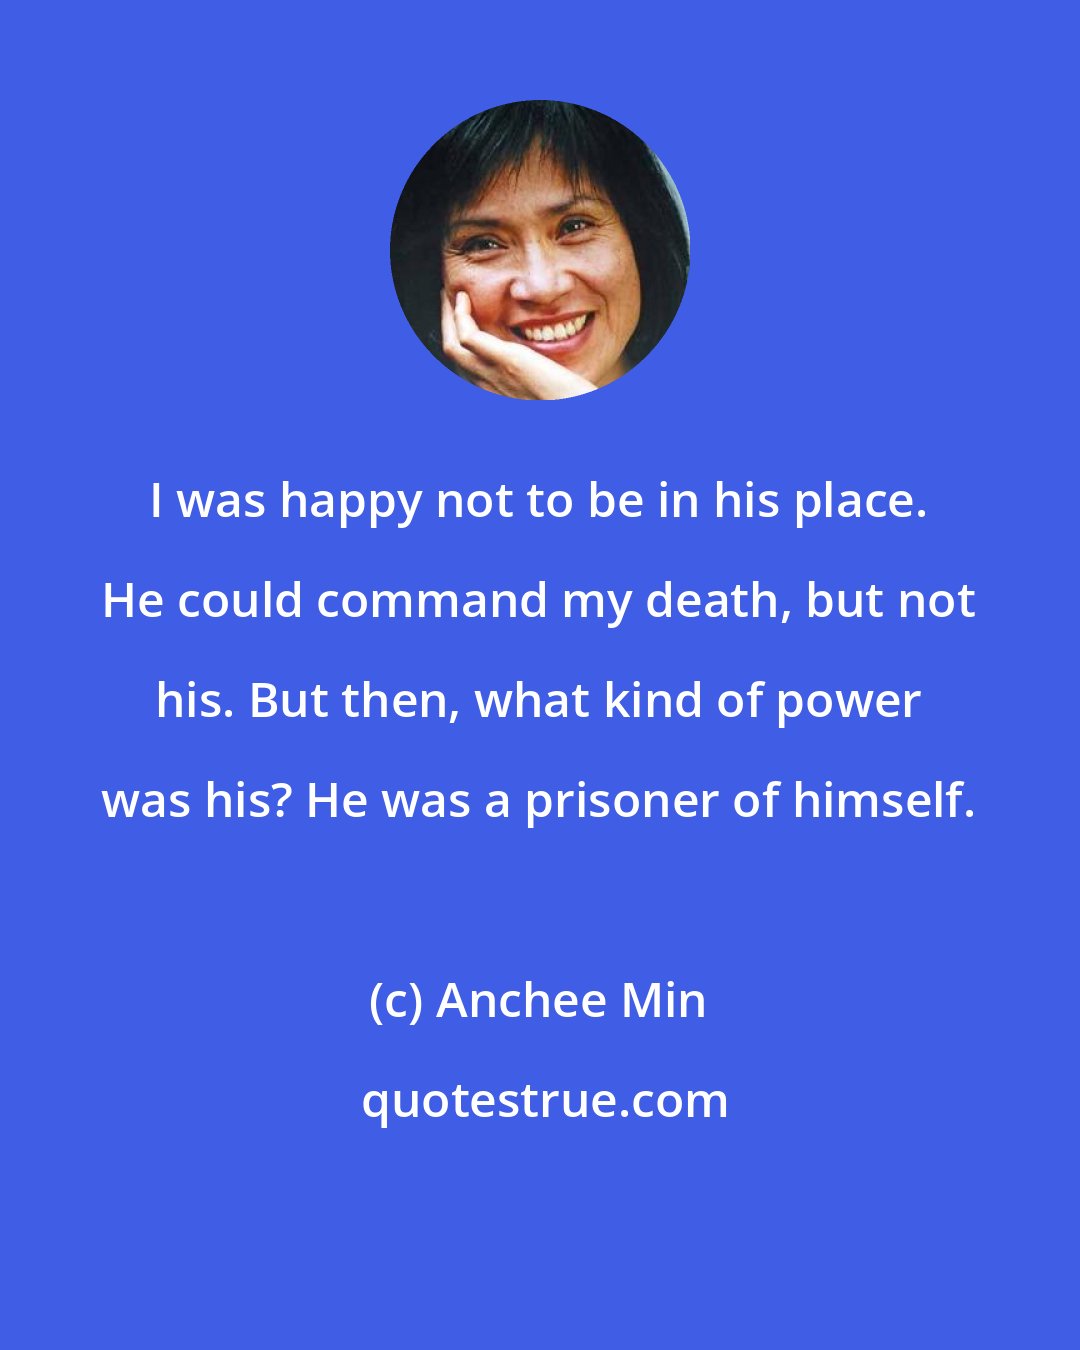 Anchee Min: I was happy not to be in his place. He could command my death, but not his. But then, what kind of power was his? He was a prisoner of himself.